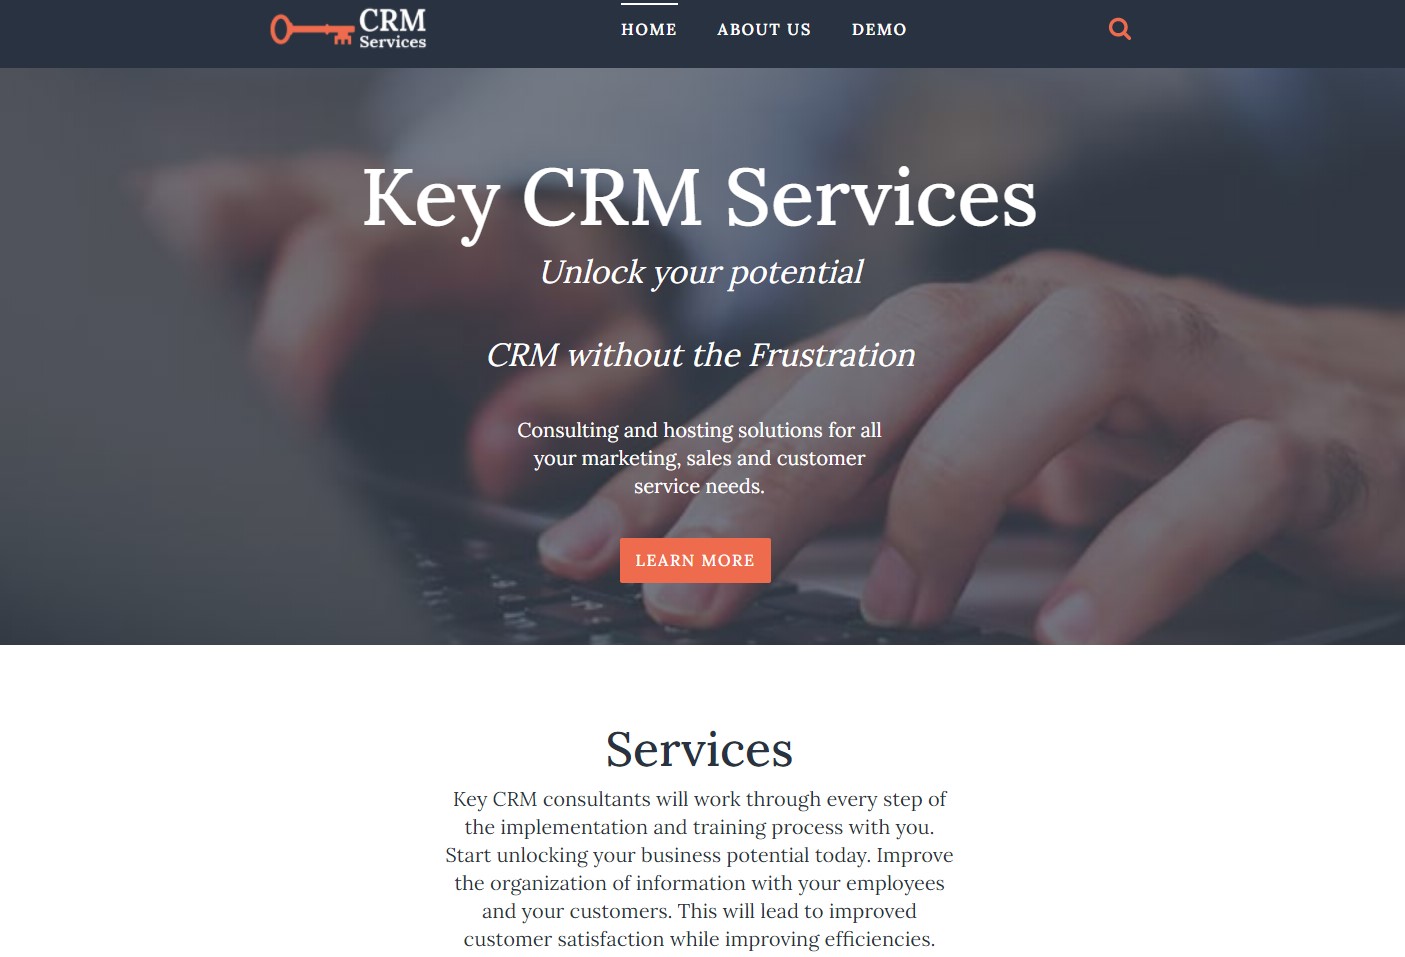 Key CRM Services homepage